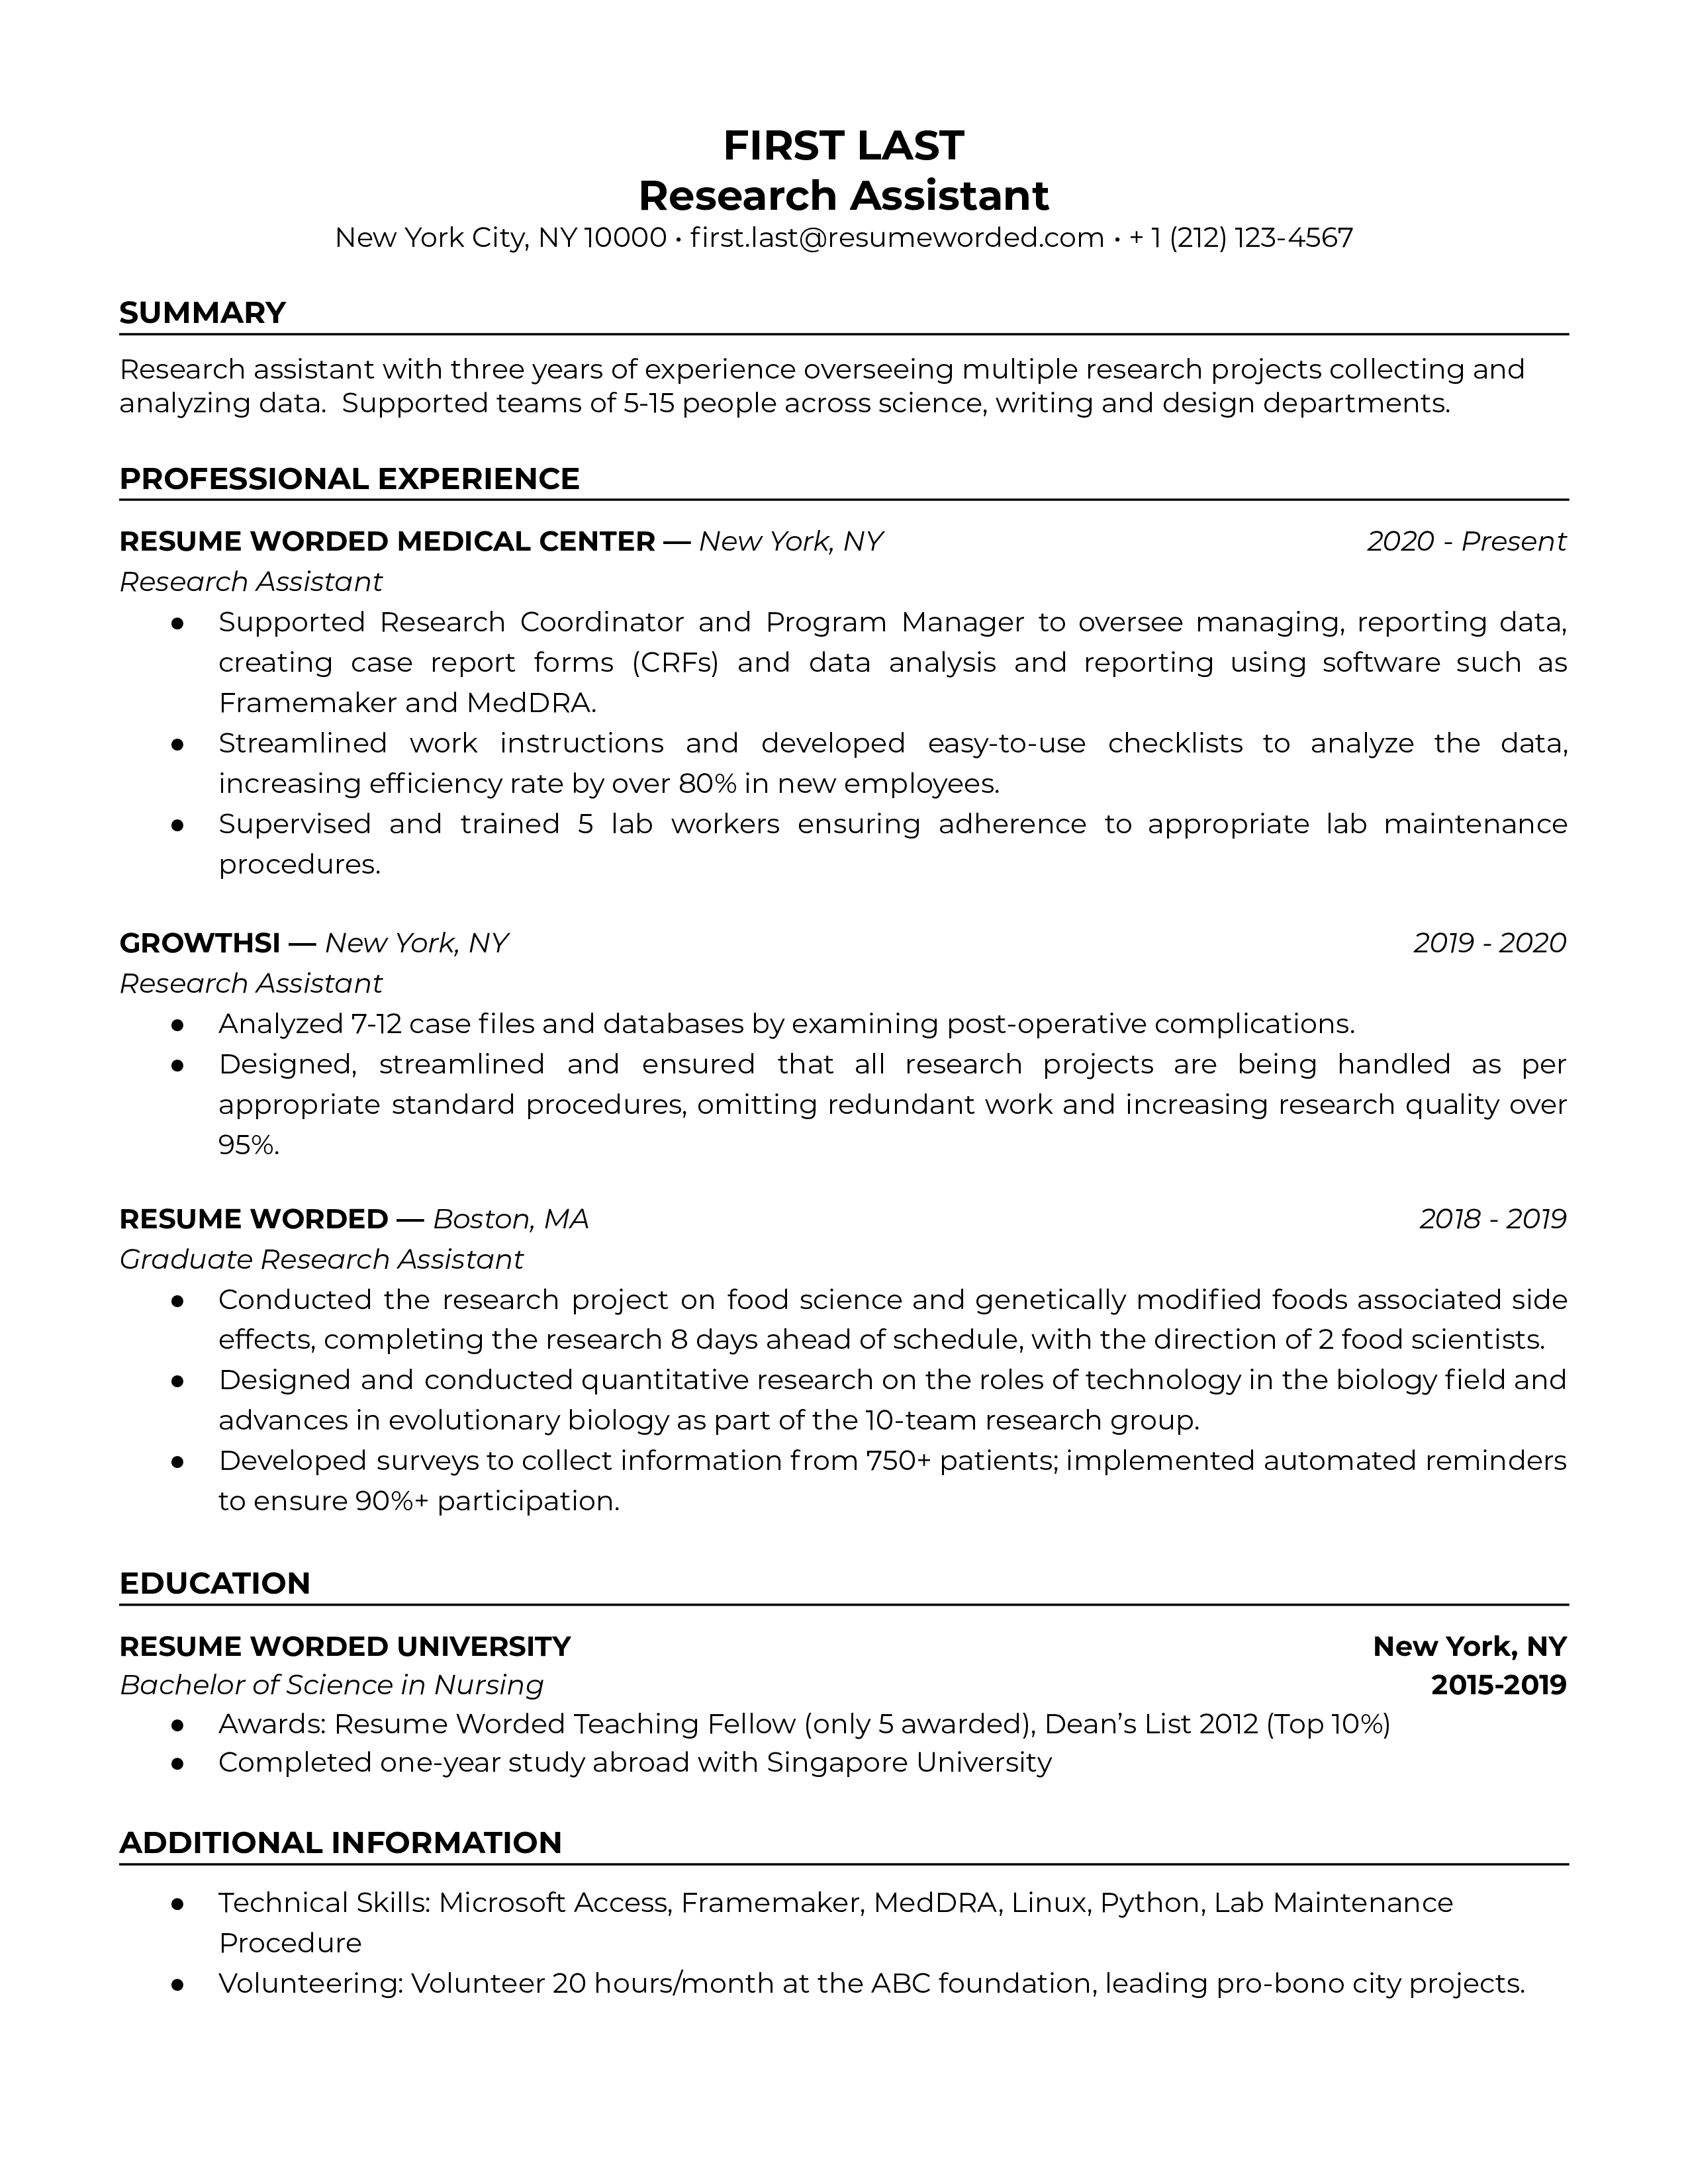 Snapshot of a detailed Research Assistant CV showcasing technical skills and specific research achievements.